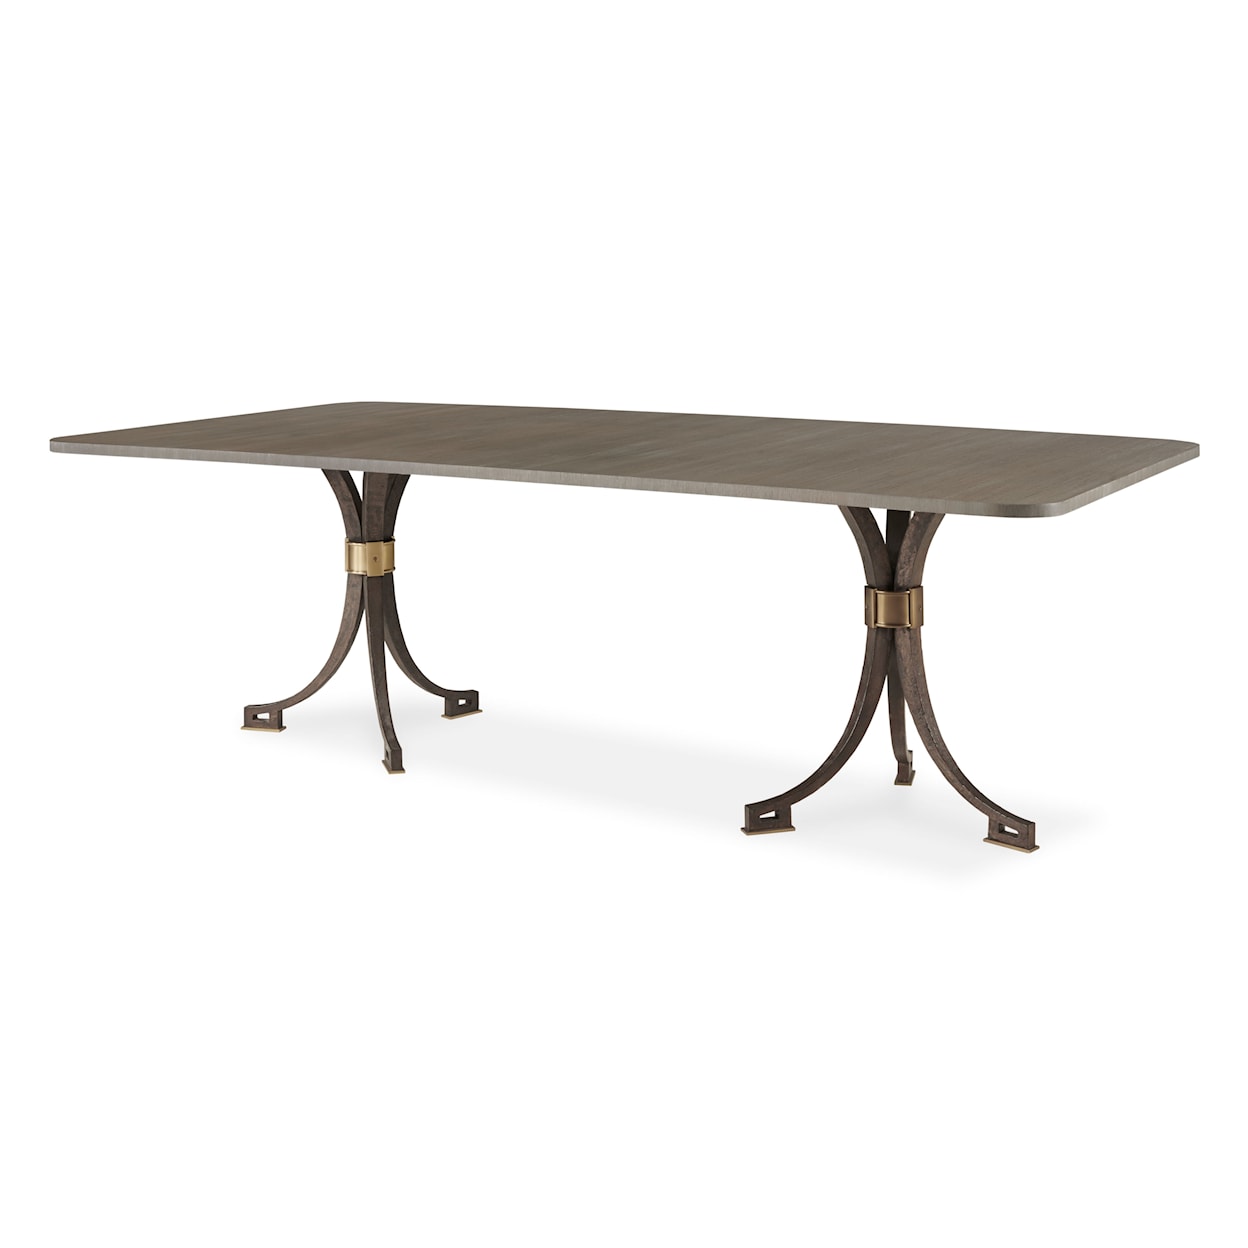 Century Windsor Smith Phase 2 Dining Table